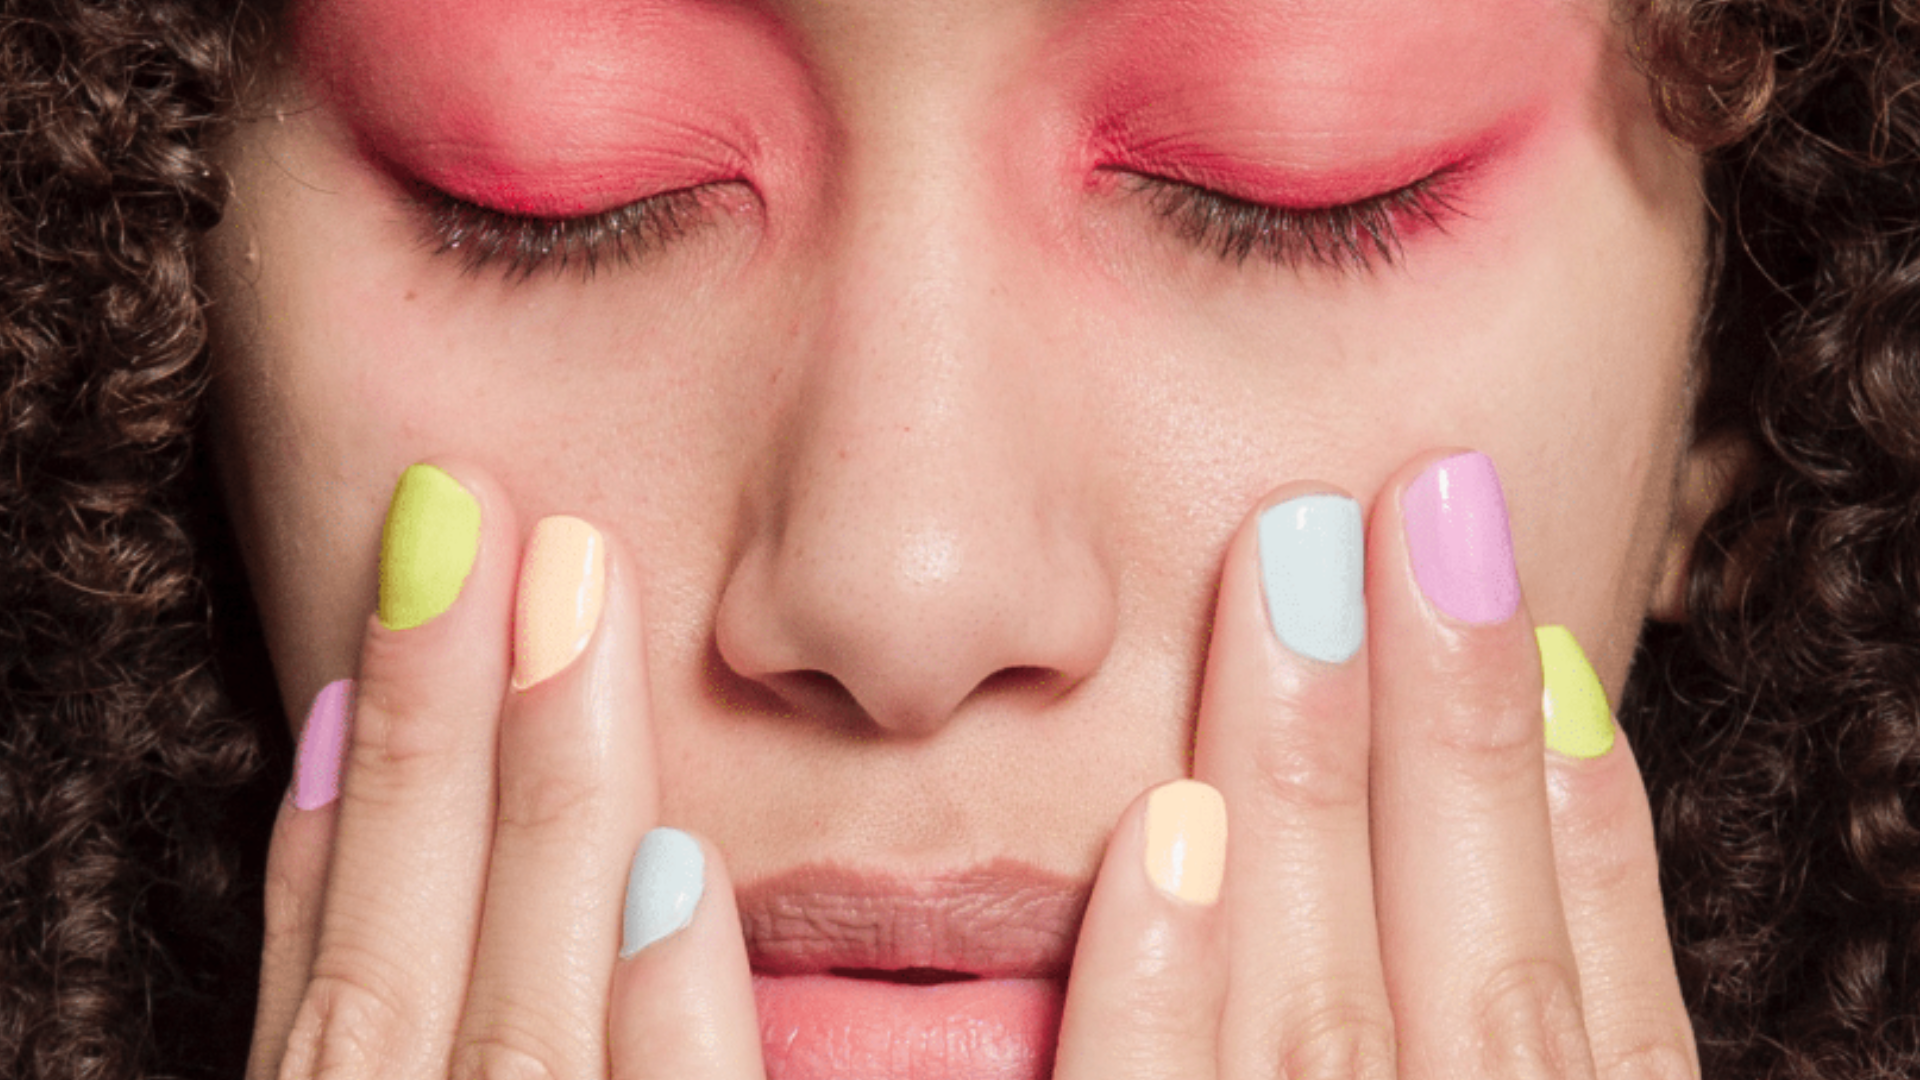 The rules of wearing white nail varnish